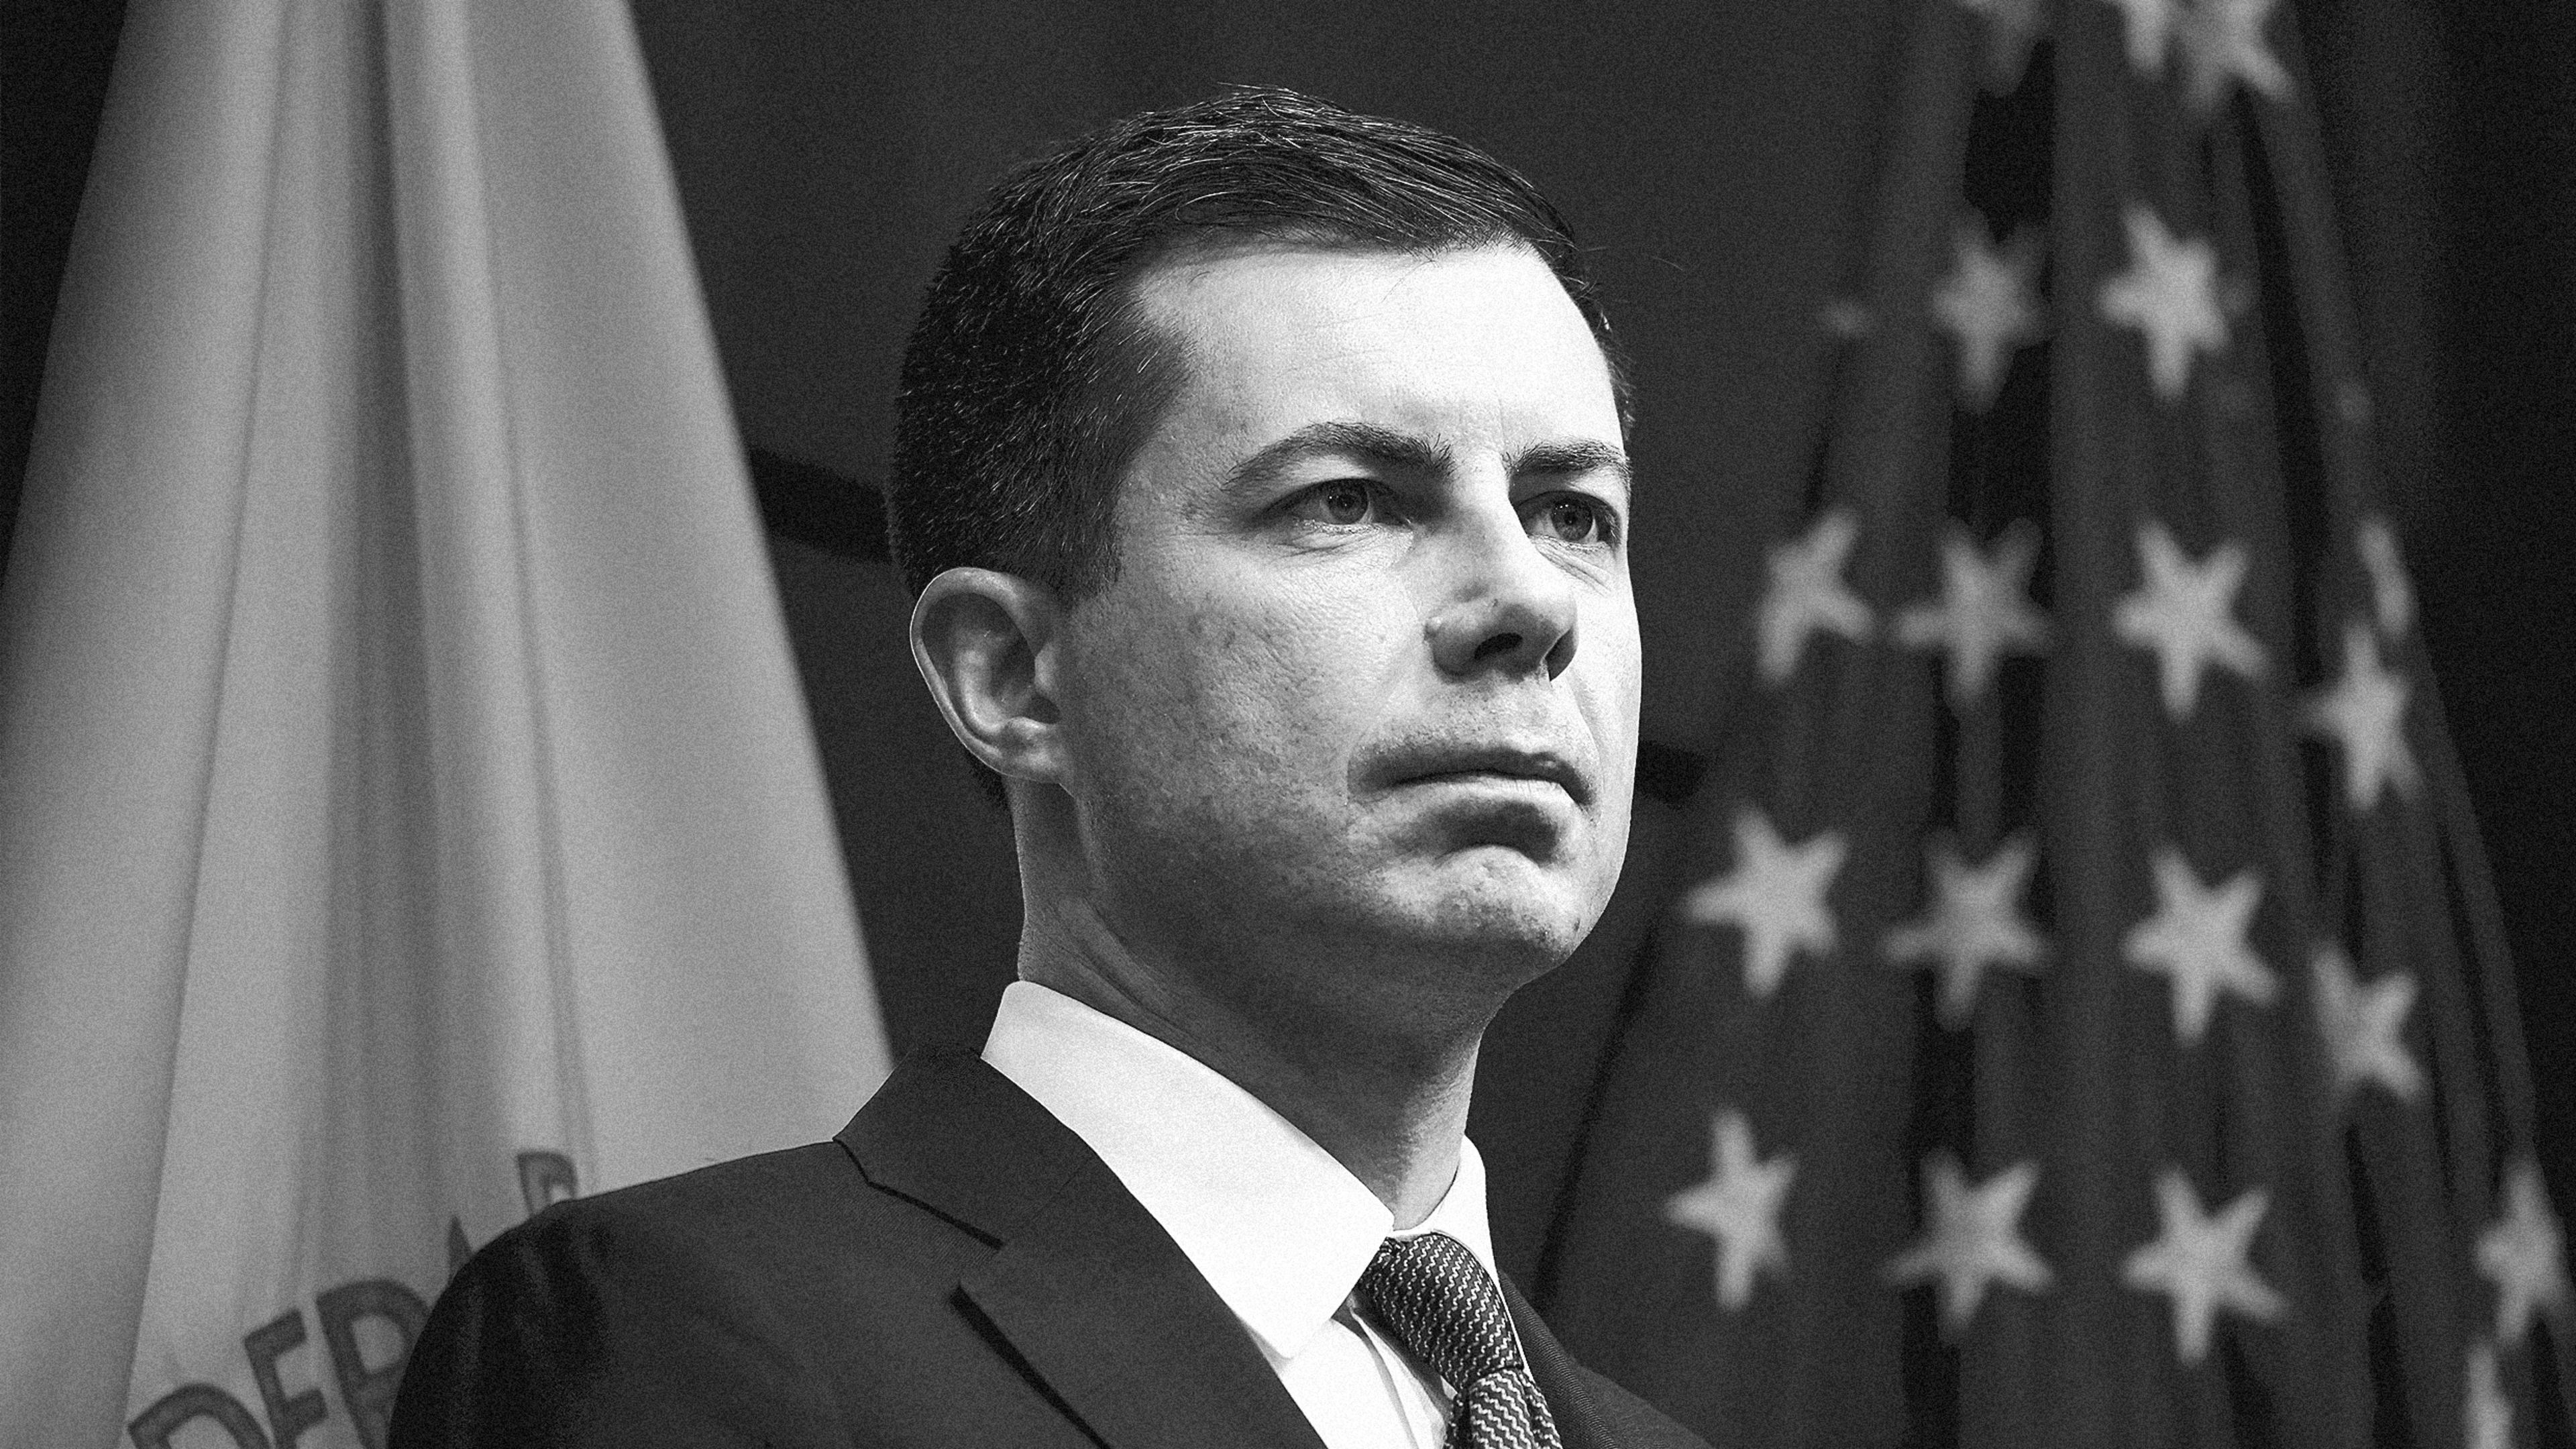 ‘This is a preventable crisis’: Pete Buttigieg on spending $800 million to eliminate traffic deaths